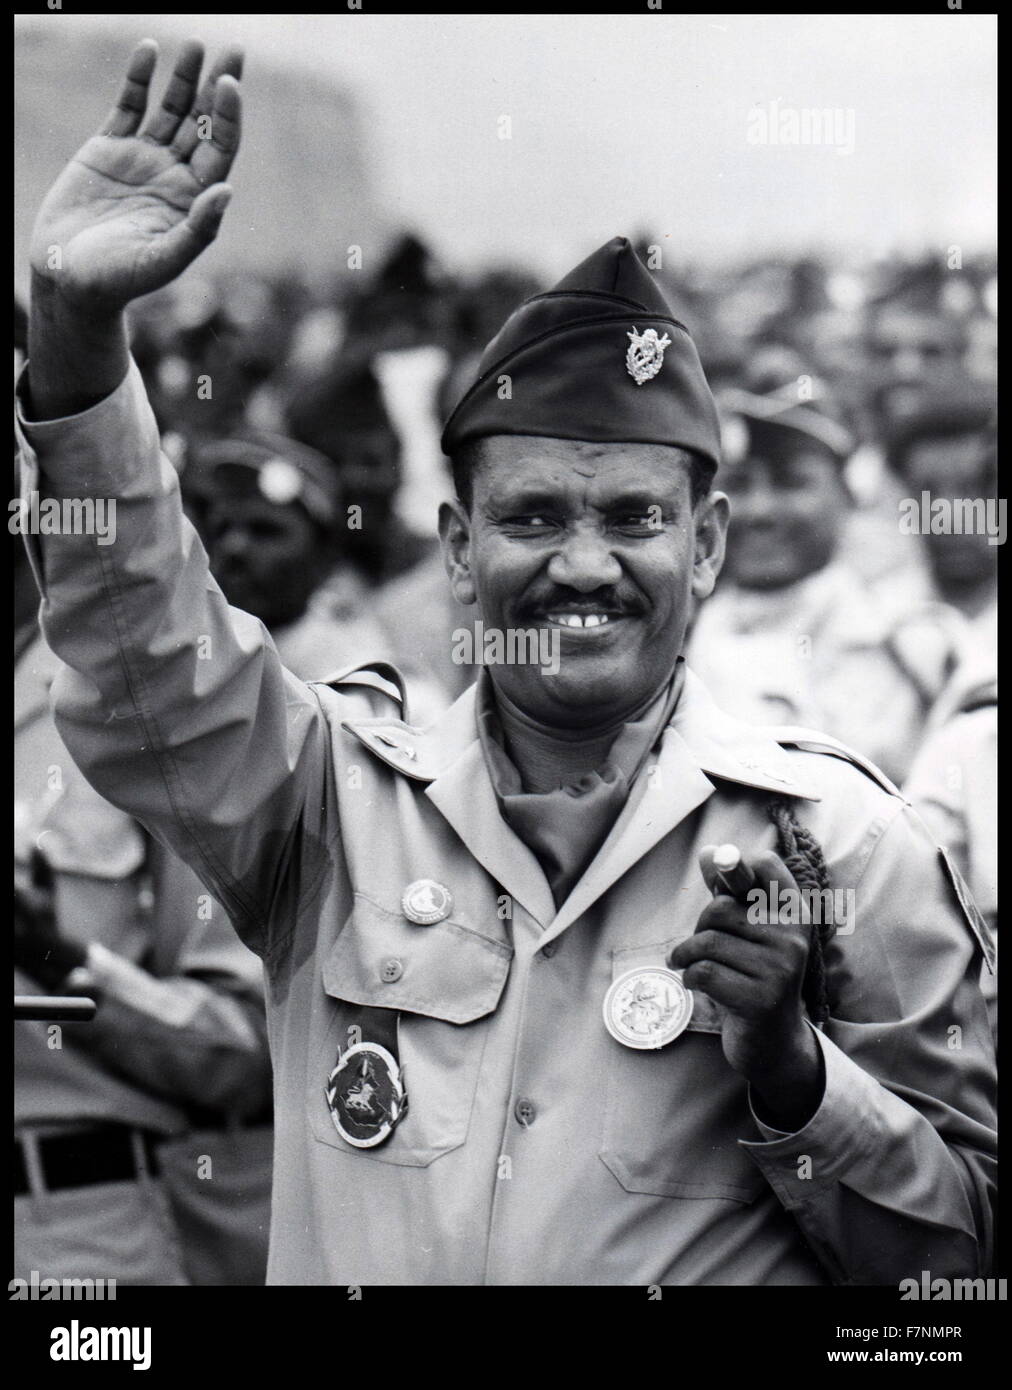 Lieutenant Colonel Atnafu Abate (late 1930s – 1977) was an Ethiopian military officer and a leading member of the Derg, the military junta which deposed Emperor Haile Selassie and ruled the country for the next several years. Stock Photo